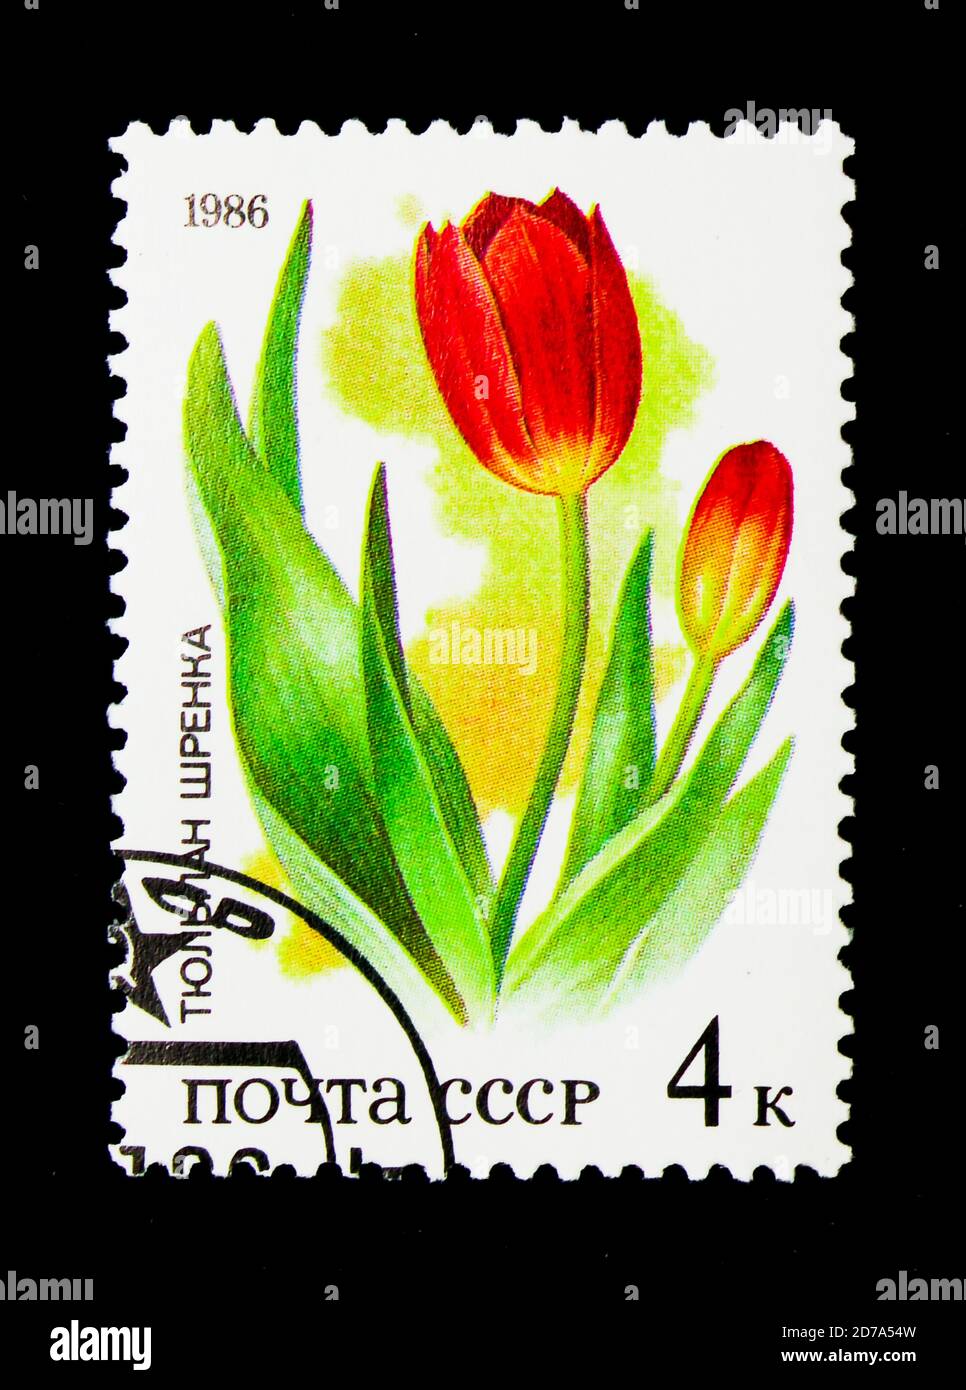 MOSCOW, RUSSIA - NOVEMBER 26, 2017: A stamp printed in USSR (Russia) shows Tulips, (Tulipa suaveolens, Tulipa schrenkii), Plants of Russian Steppes se Stock Photo